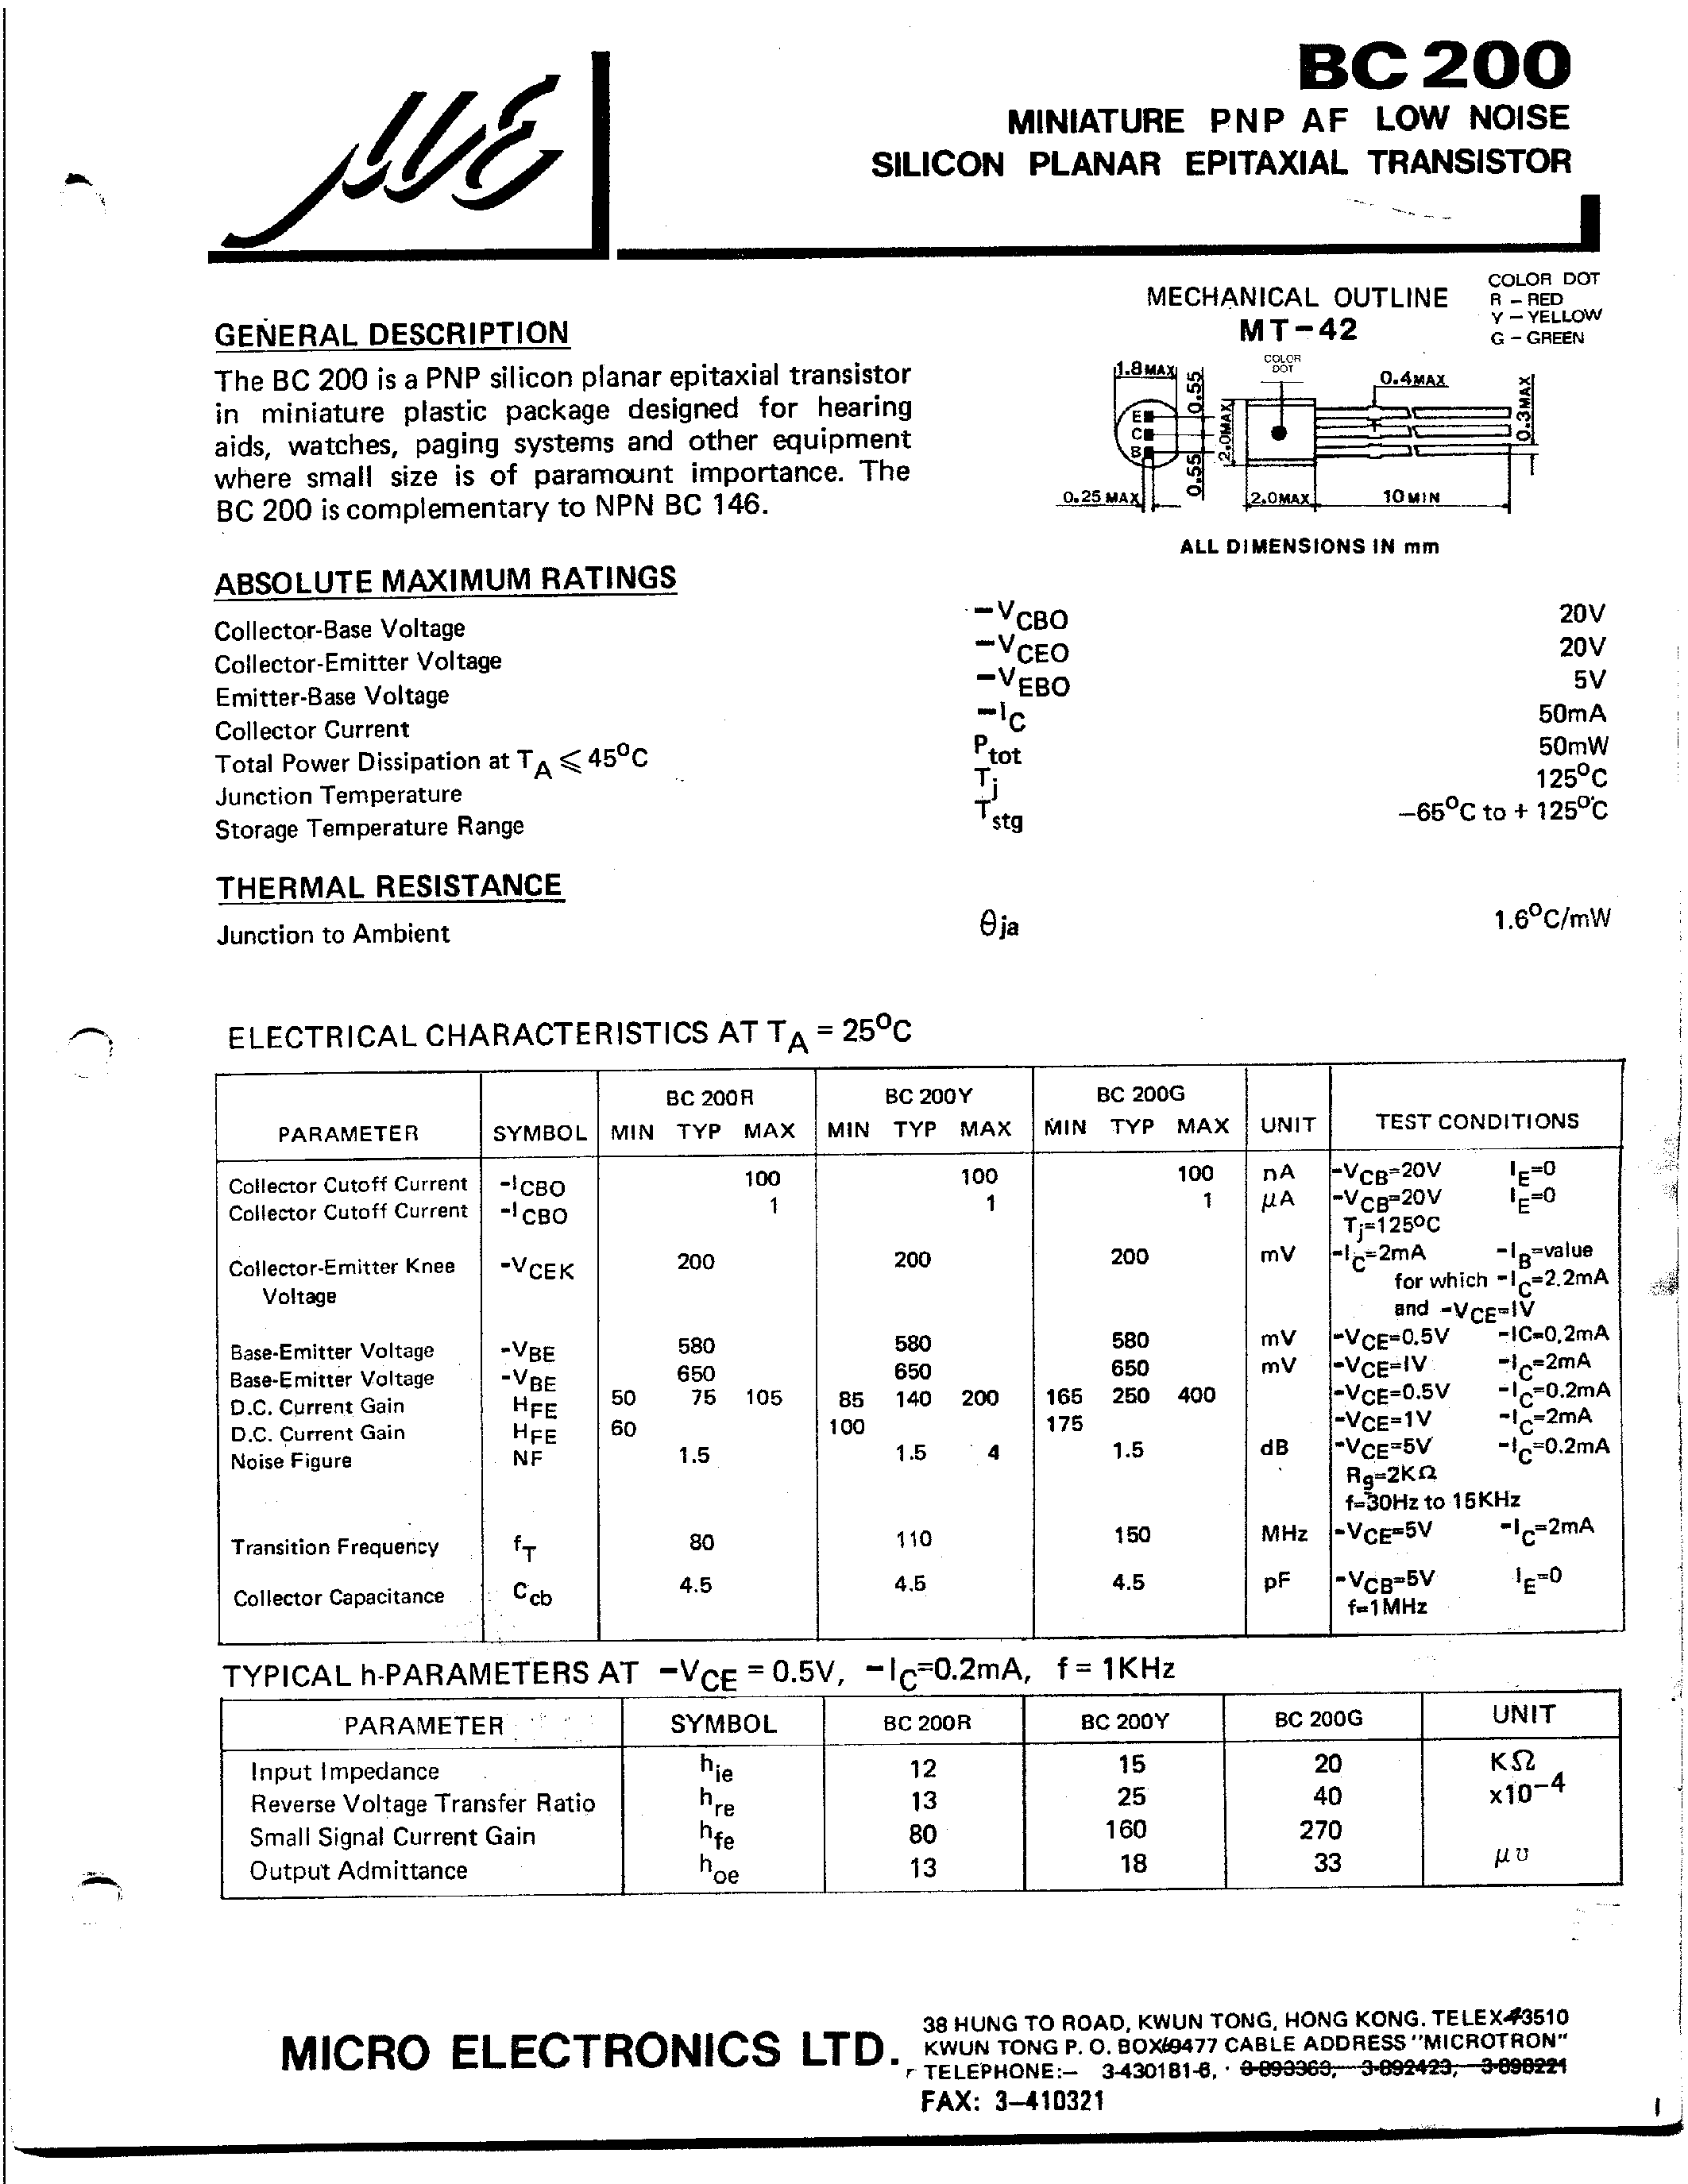 Datasheet BC200 - MINIATURE PNP AF LOW NOISE SILICON PLANAR EPITAXIAL TRANSISTOR page 1